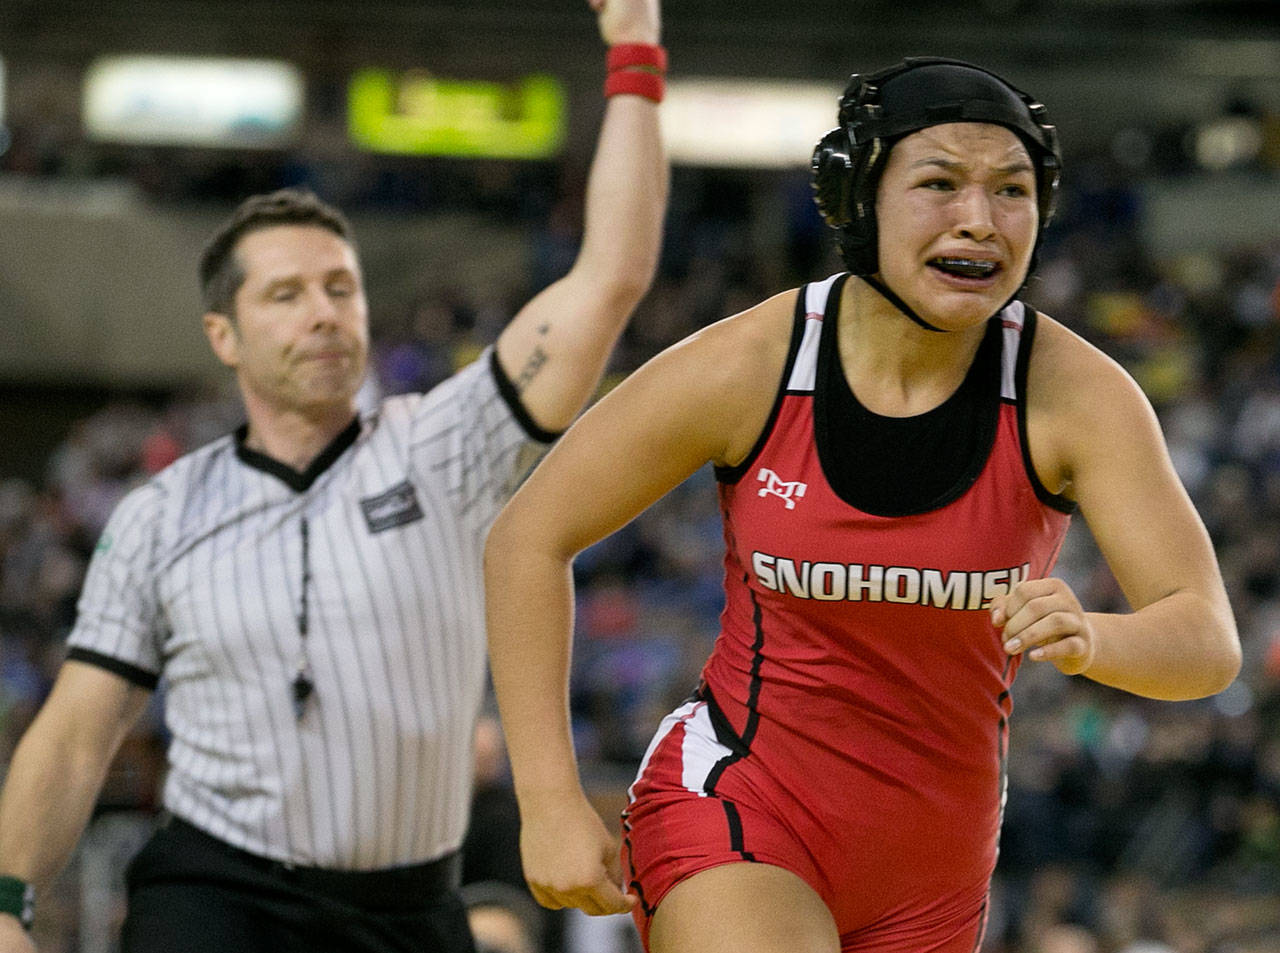 Snohomish’s Joessie Gonzales is overcome with emotion after winning the 130-pound weight class Saturday at Mat Classic XXX in the Tacoma Dome. (Kevin Clark / The Herald)